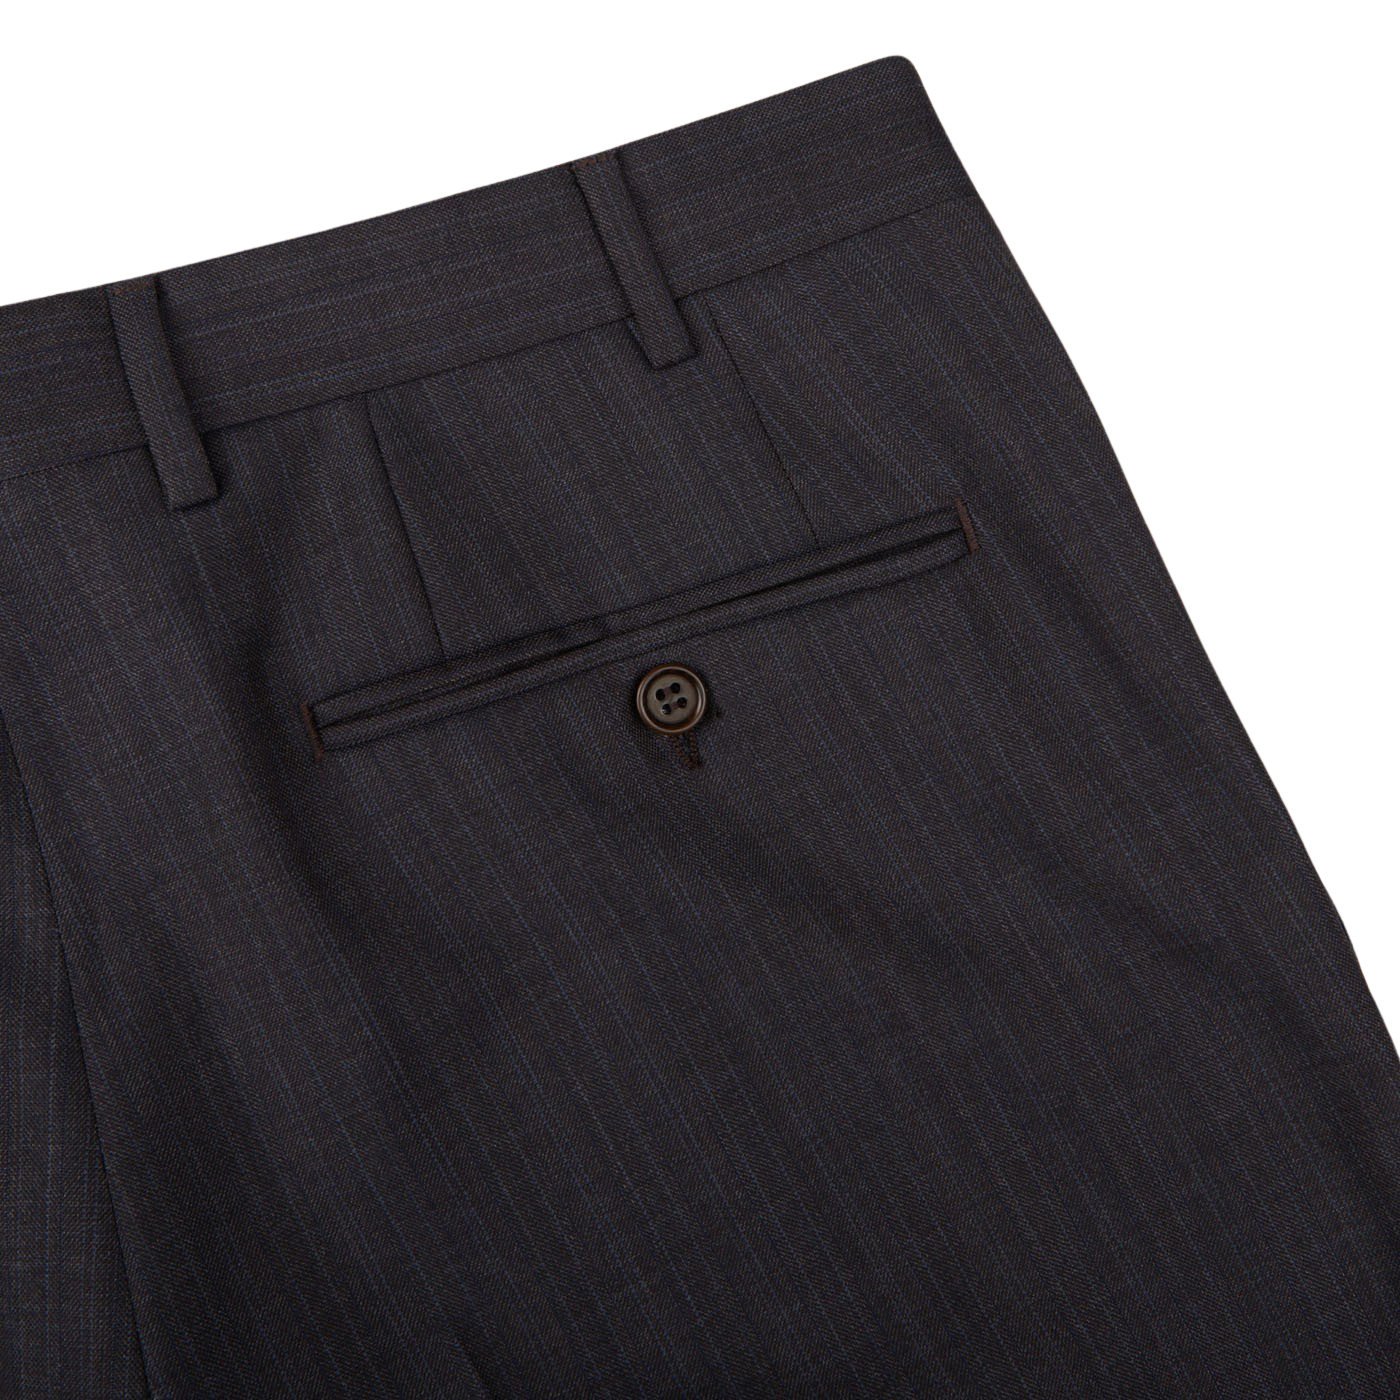 Canali Blue Brown Melange Striped Wool Suit trousers.